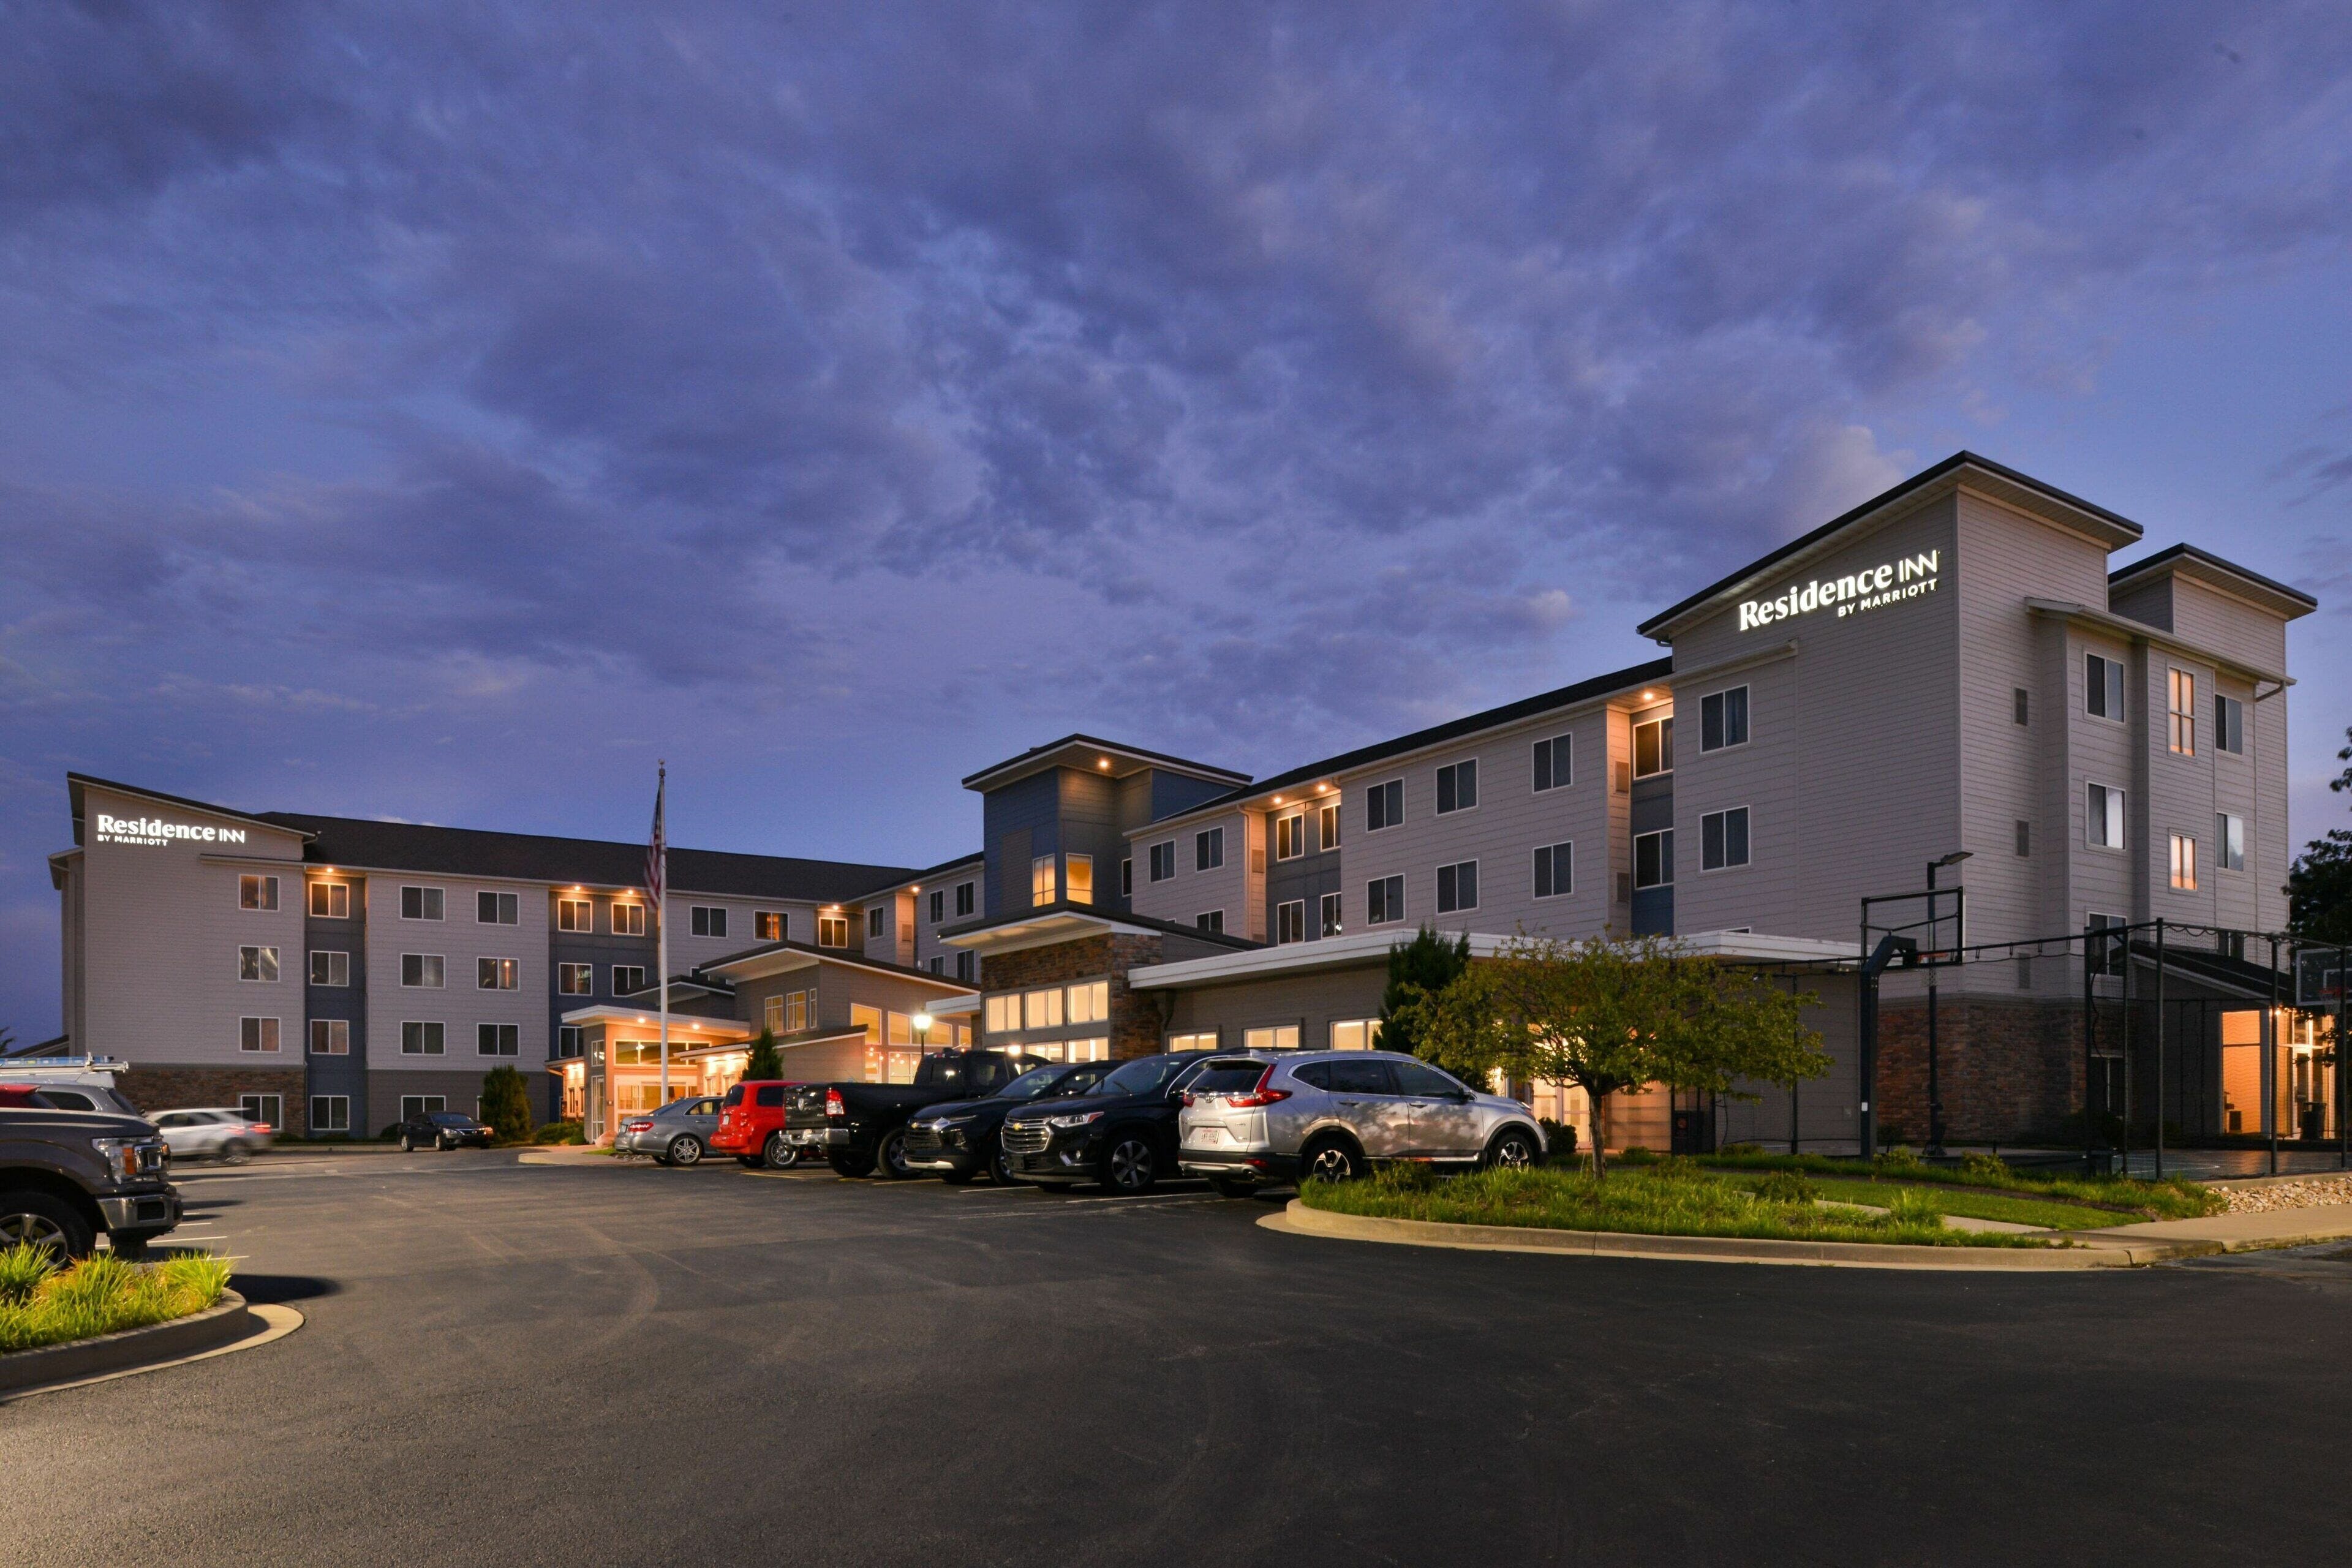 Building view of Residence Inn by Marriott Springfield South